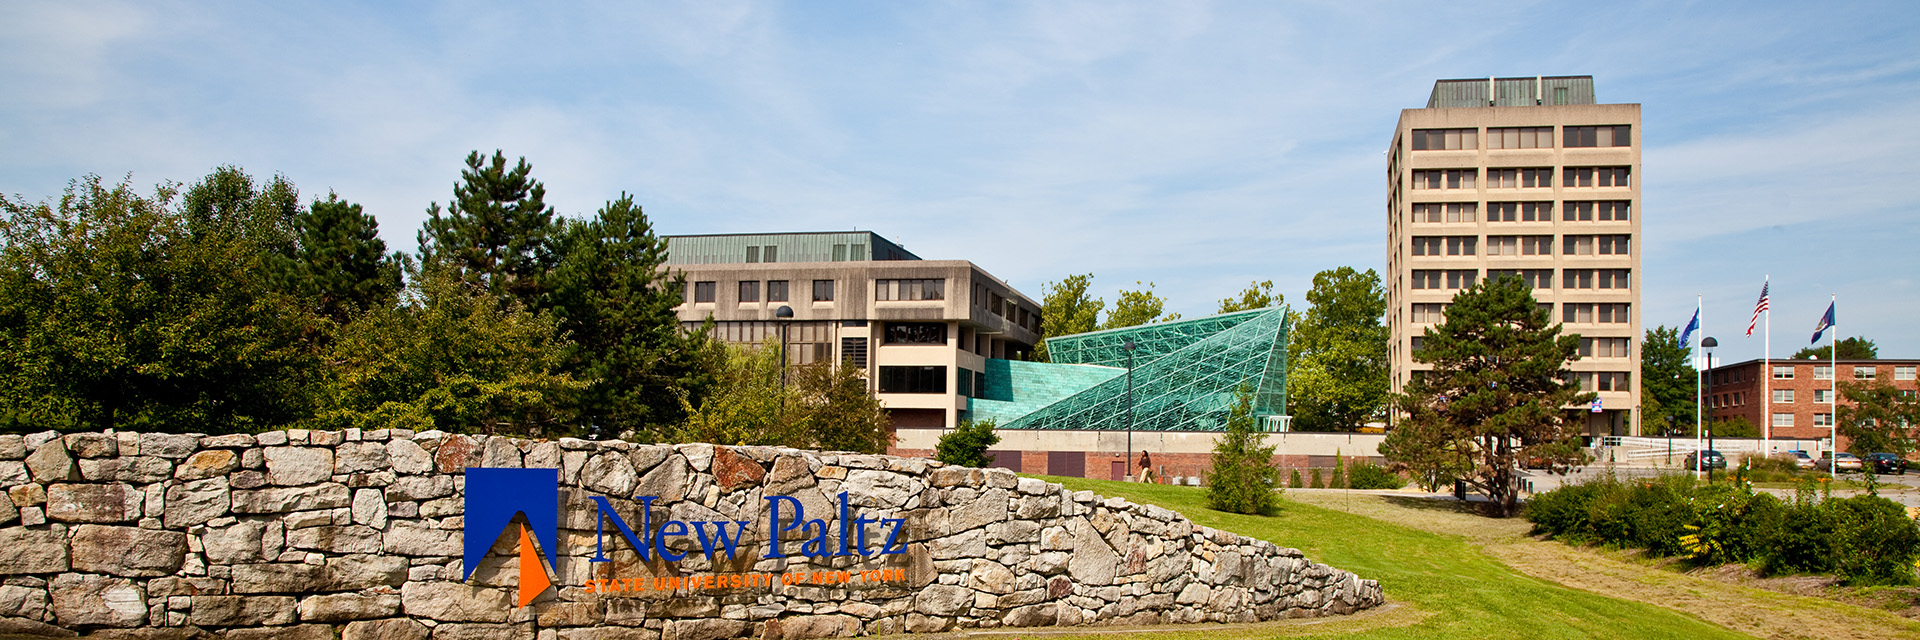 Suny New Paltz Calendar 2022 Suny New Paltz | Office Of Human Resources, Diversity & Inclusion | Office  Of Human Resources, Diversity & Inclusion